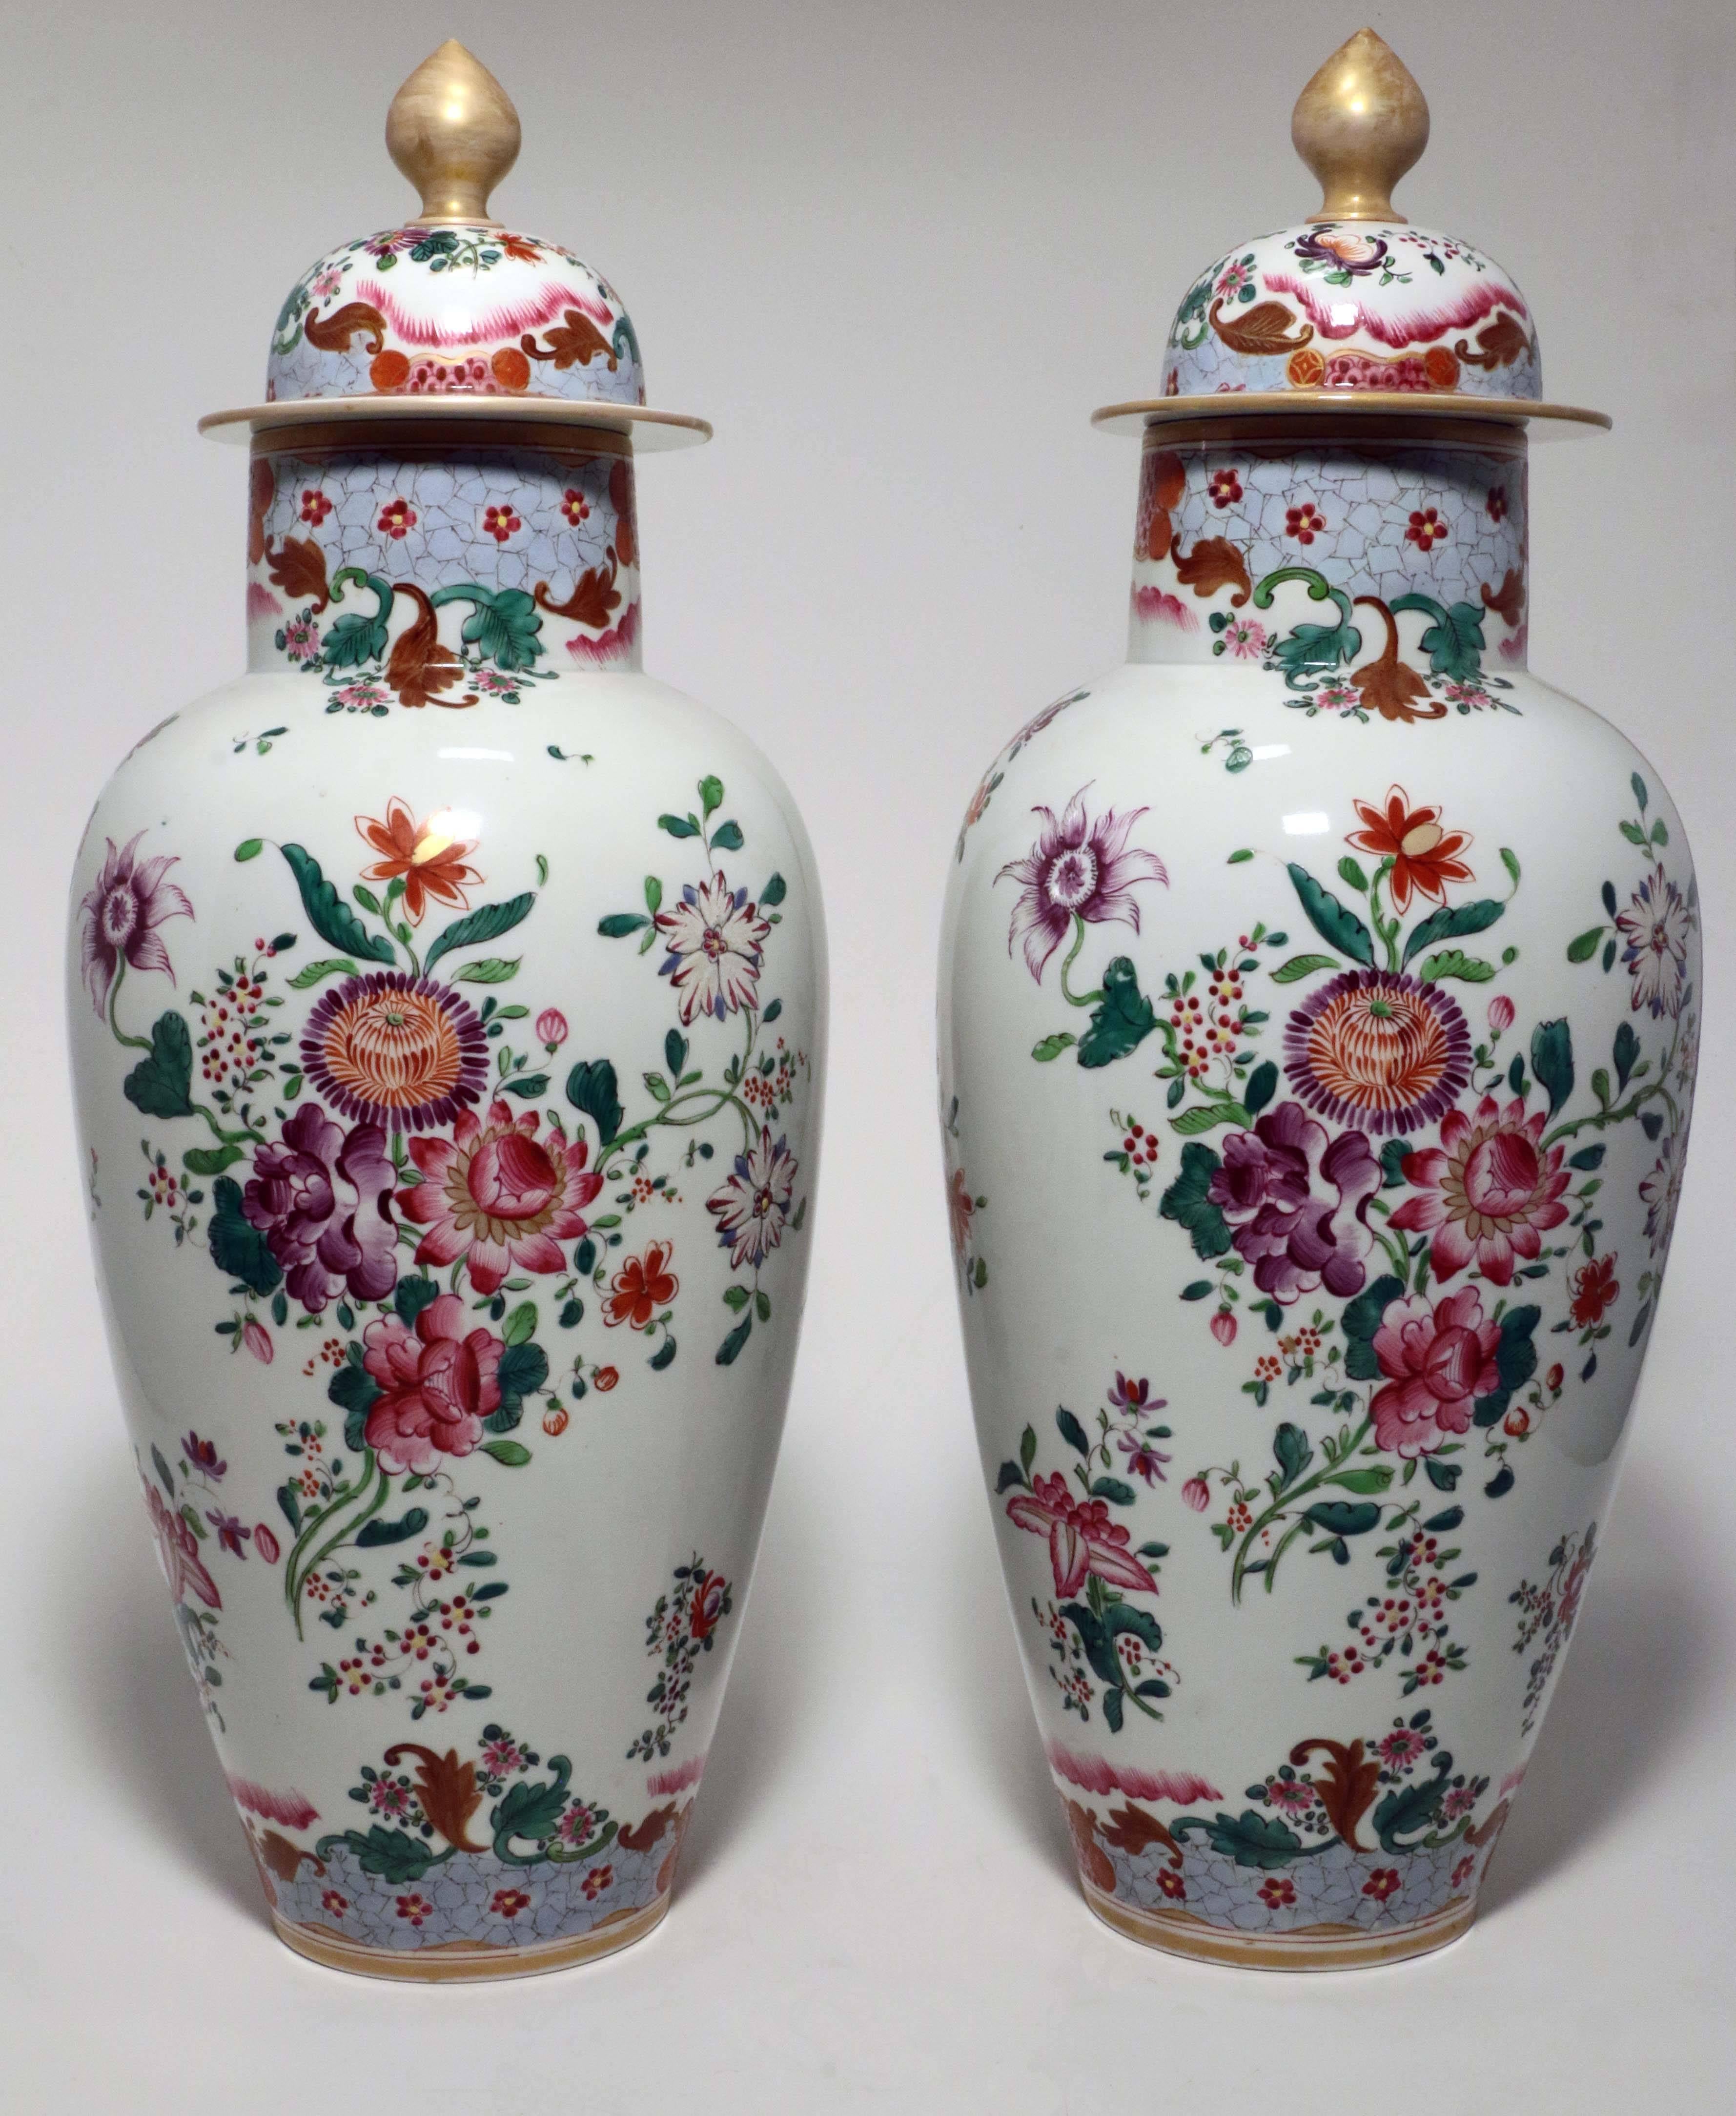 This highly decorative pair of Famille Rose vases are painted in typical palette with leaves, flowers with blue 